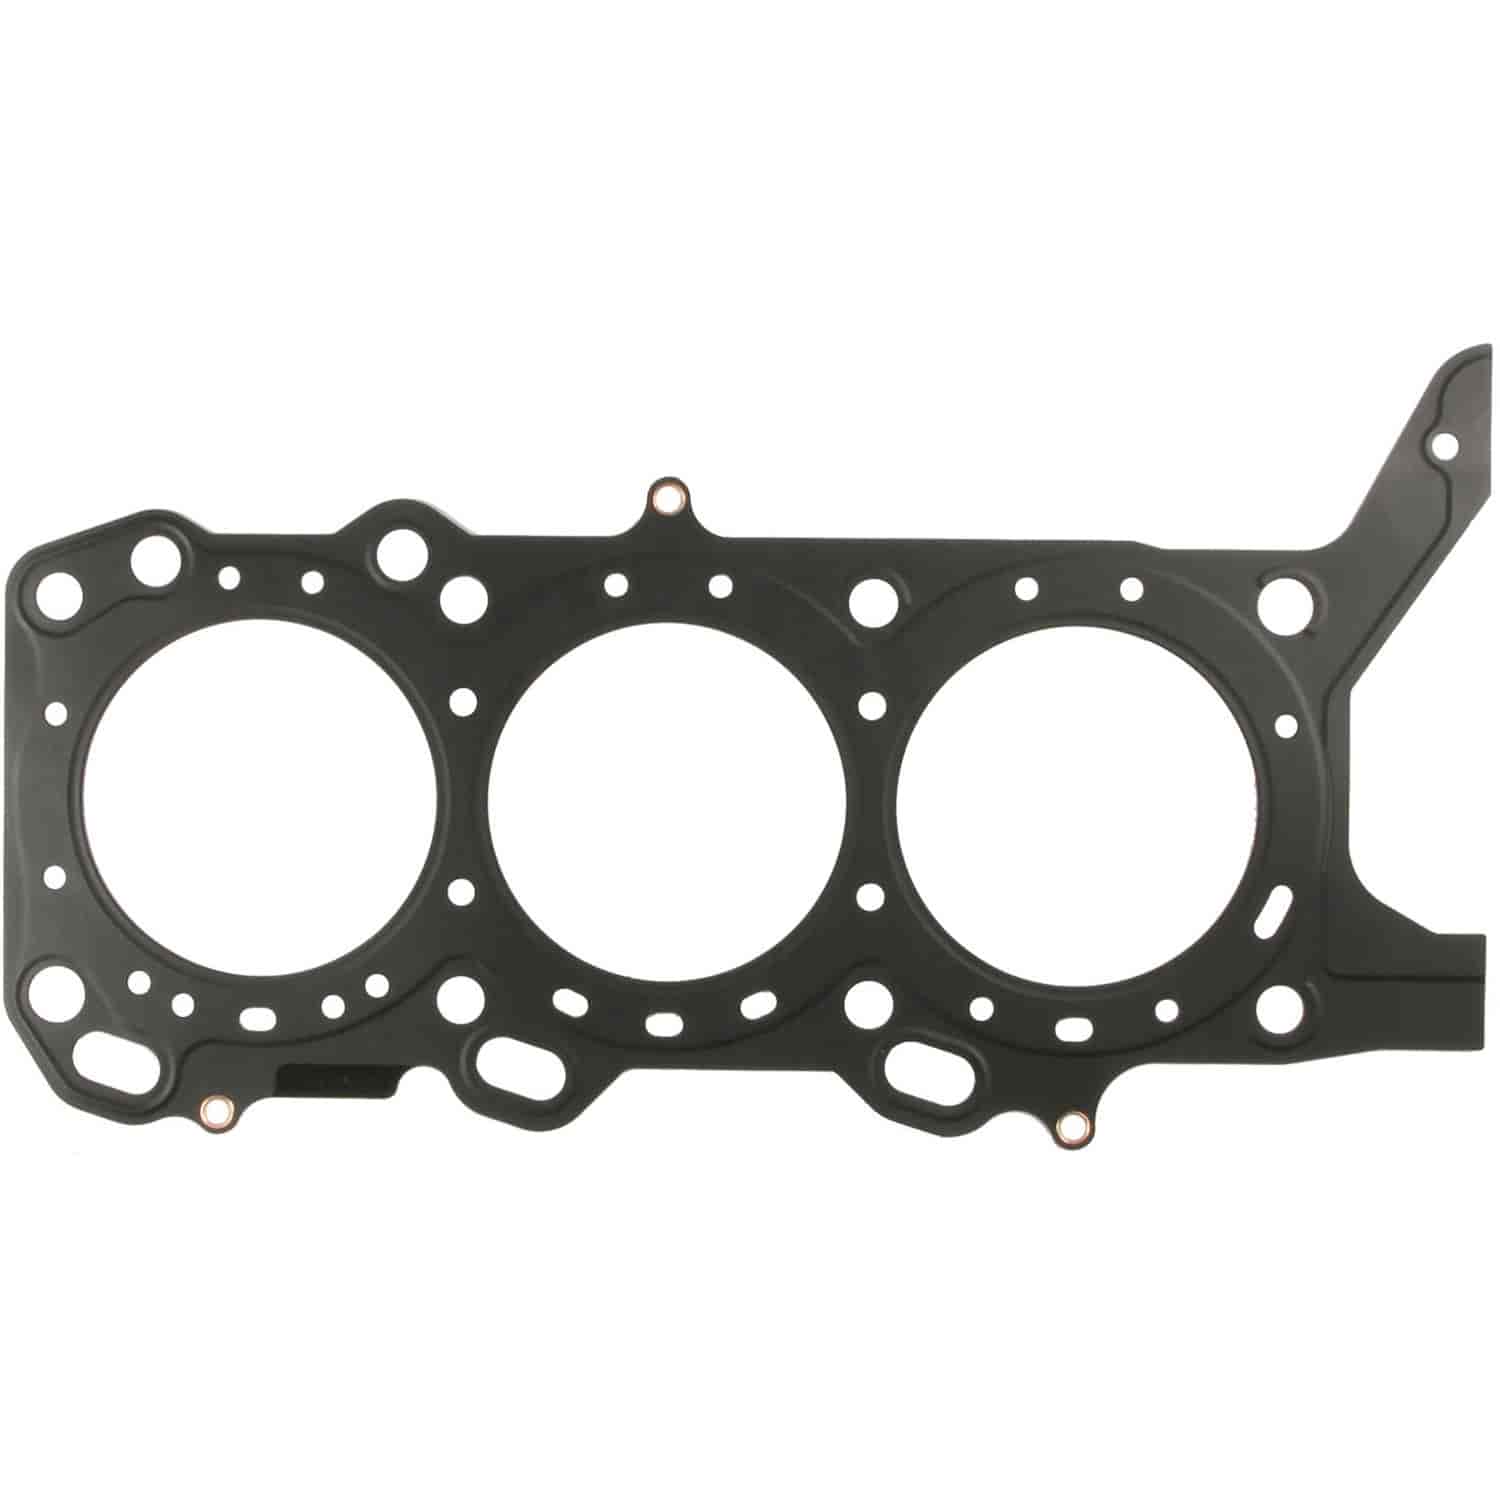 Cylinder Head Gasket Right SUZ-TRK 2.7L 2736 CC V6 H27A 2001-2005 RIGHT